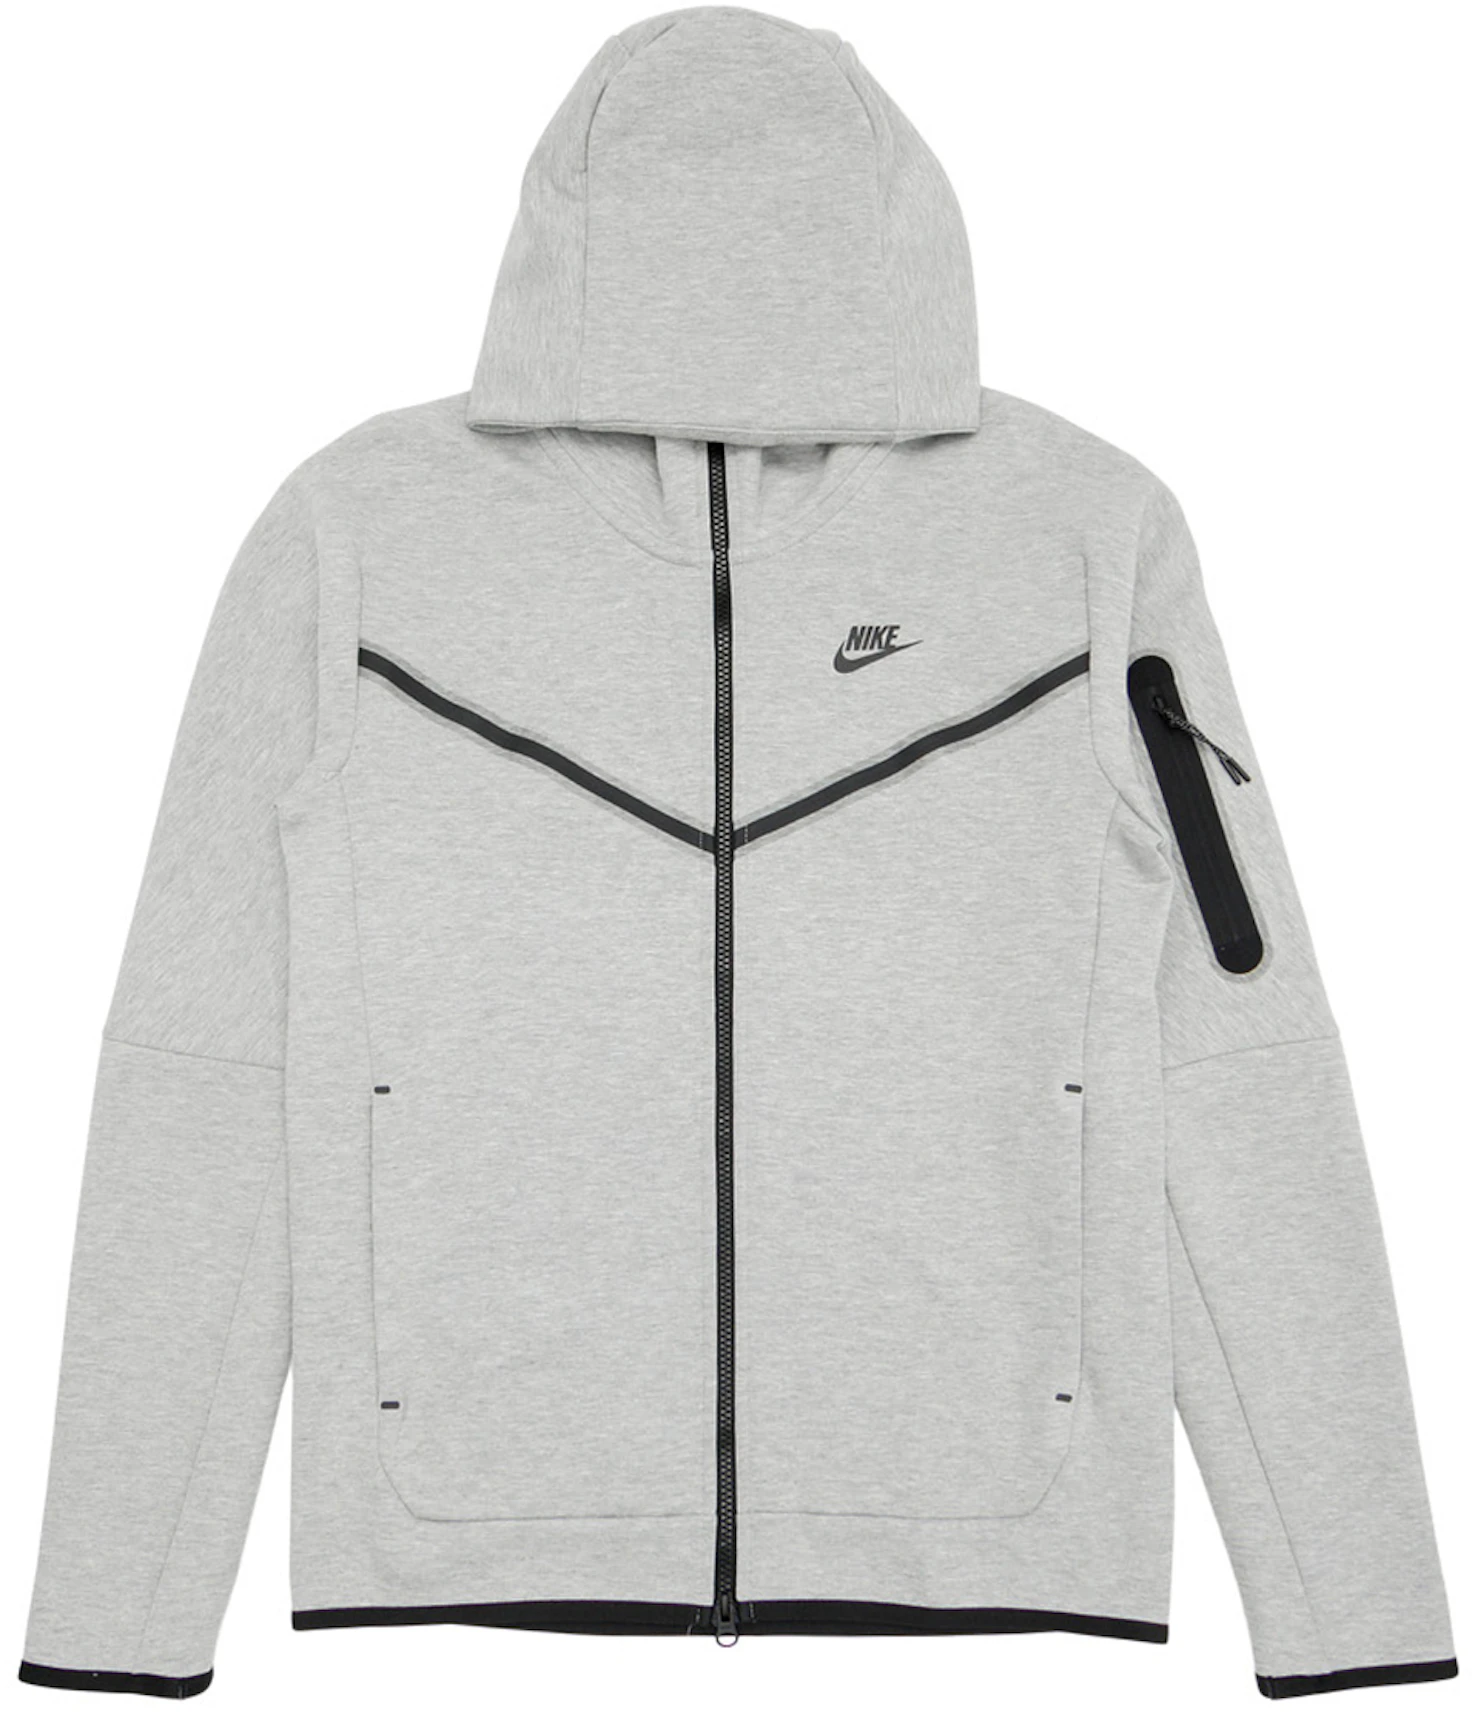 nike running jacket black and white clipart